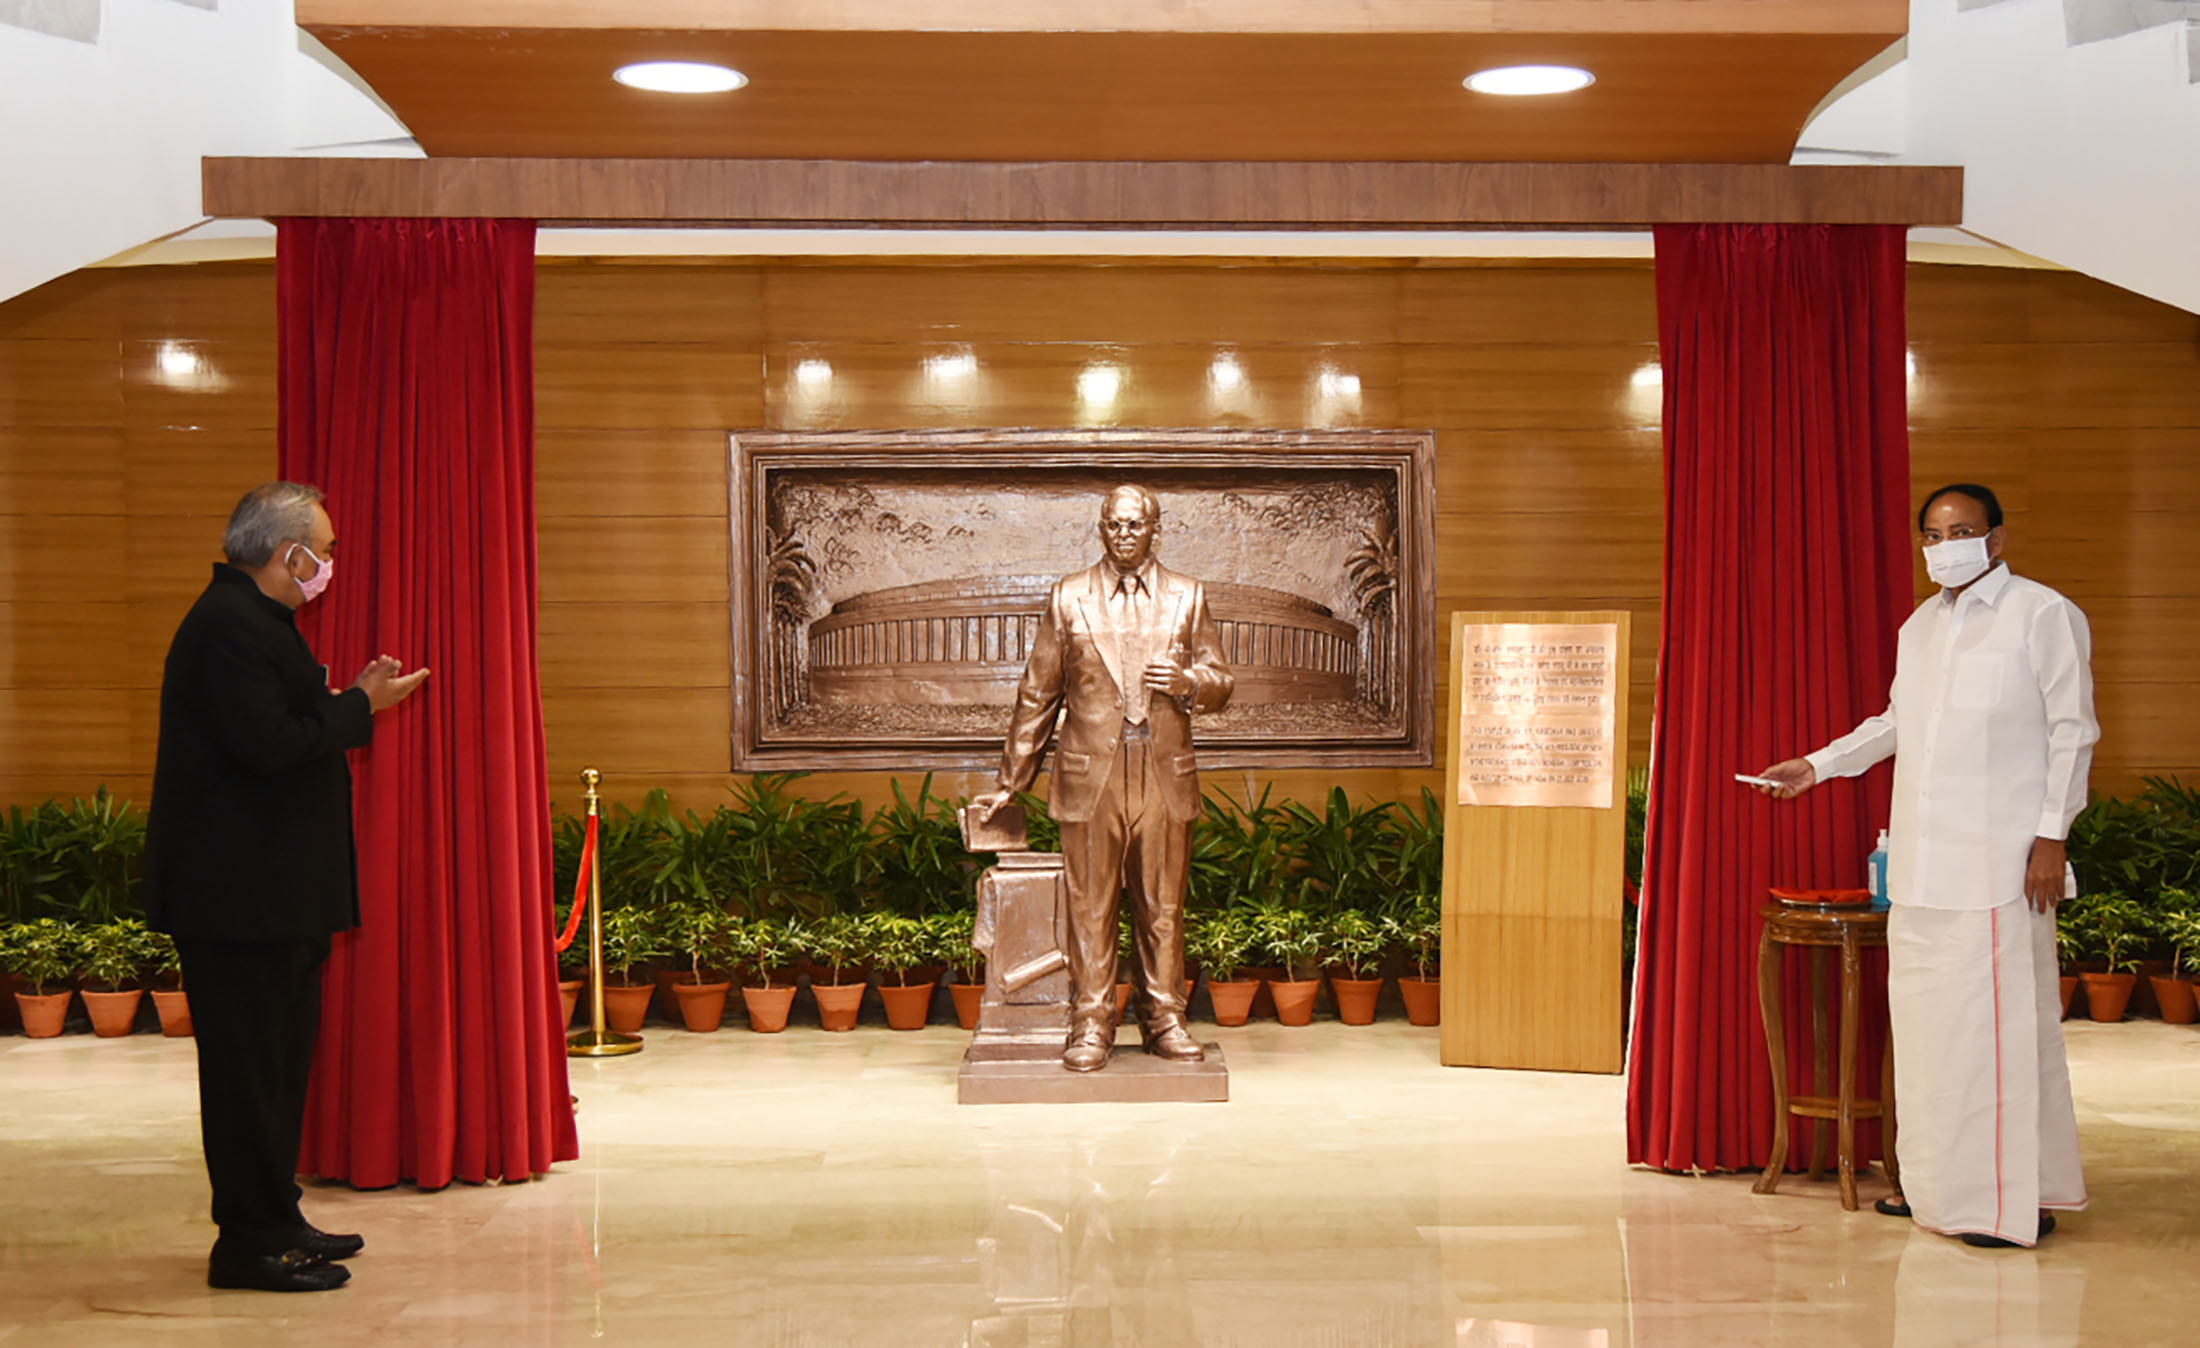 Unveils the statue of Baba Saheb Dr. B R Ambedkar at premises of office of the Comptroller and Auditor General (CAG)